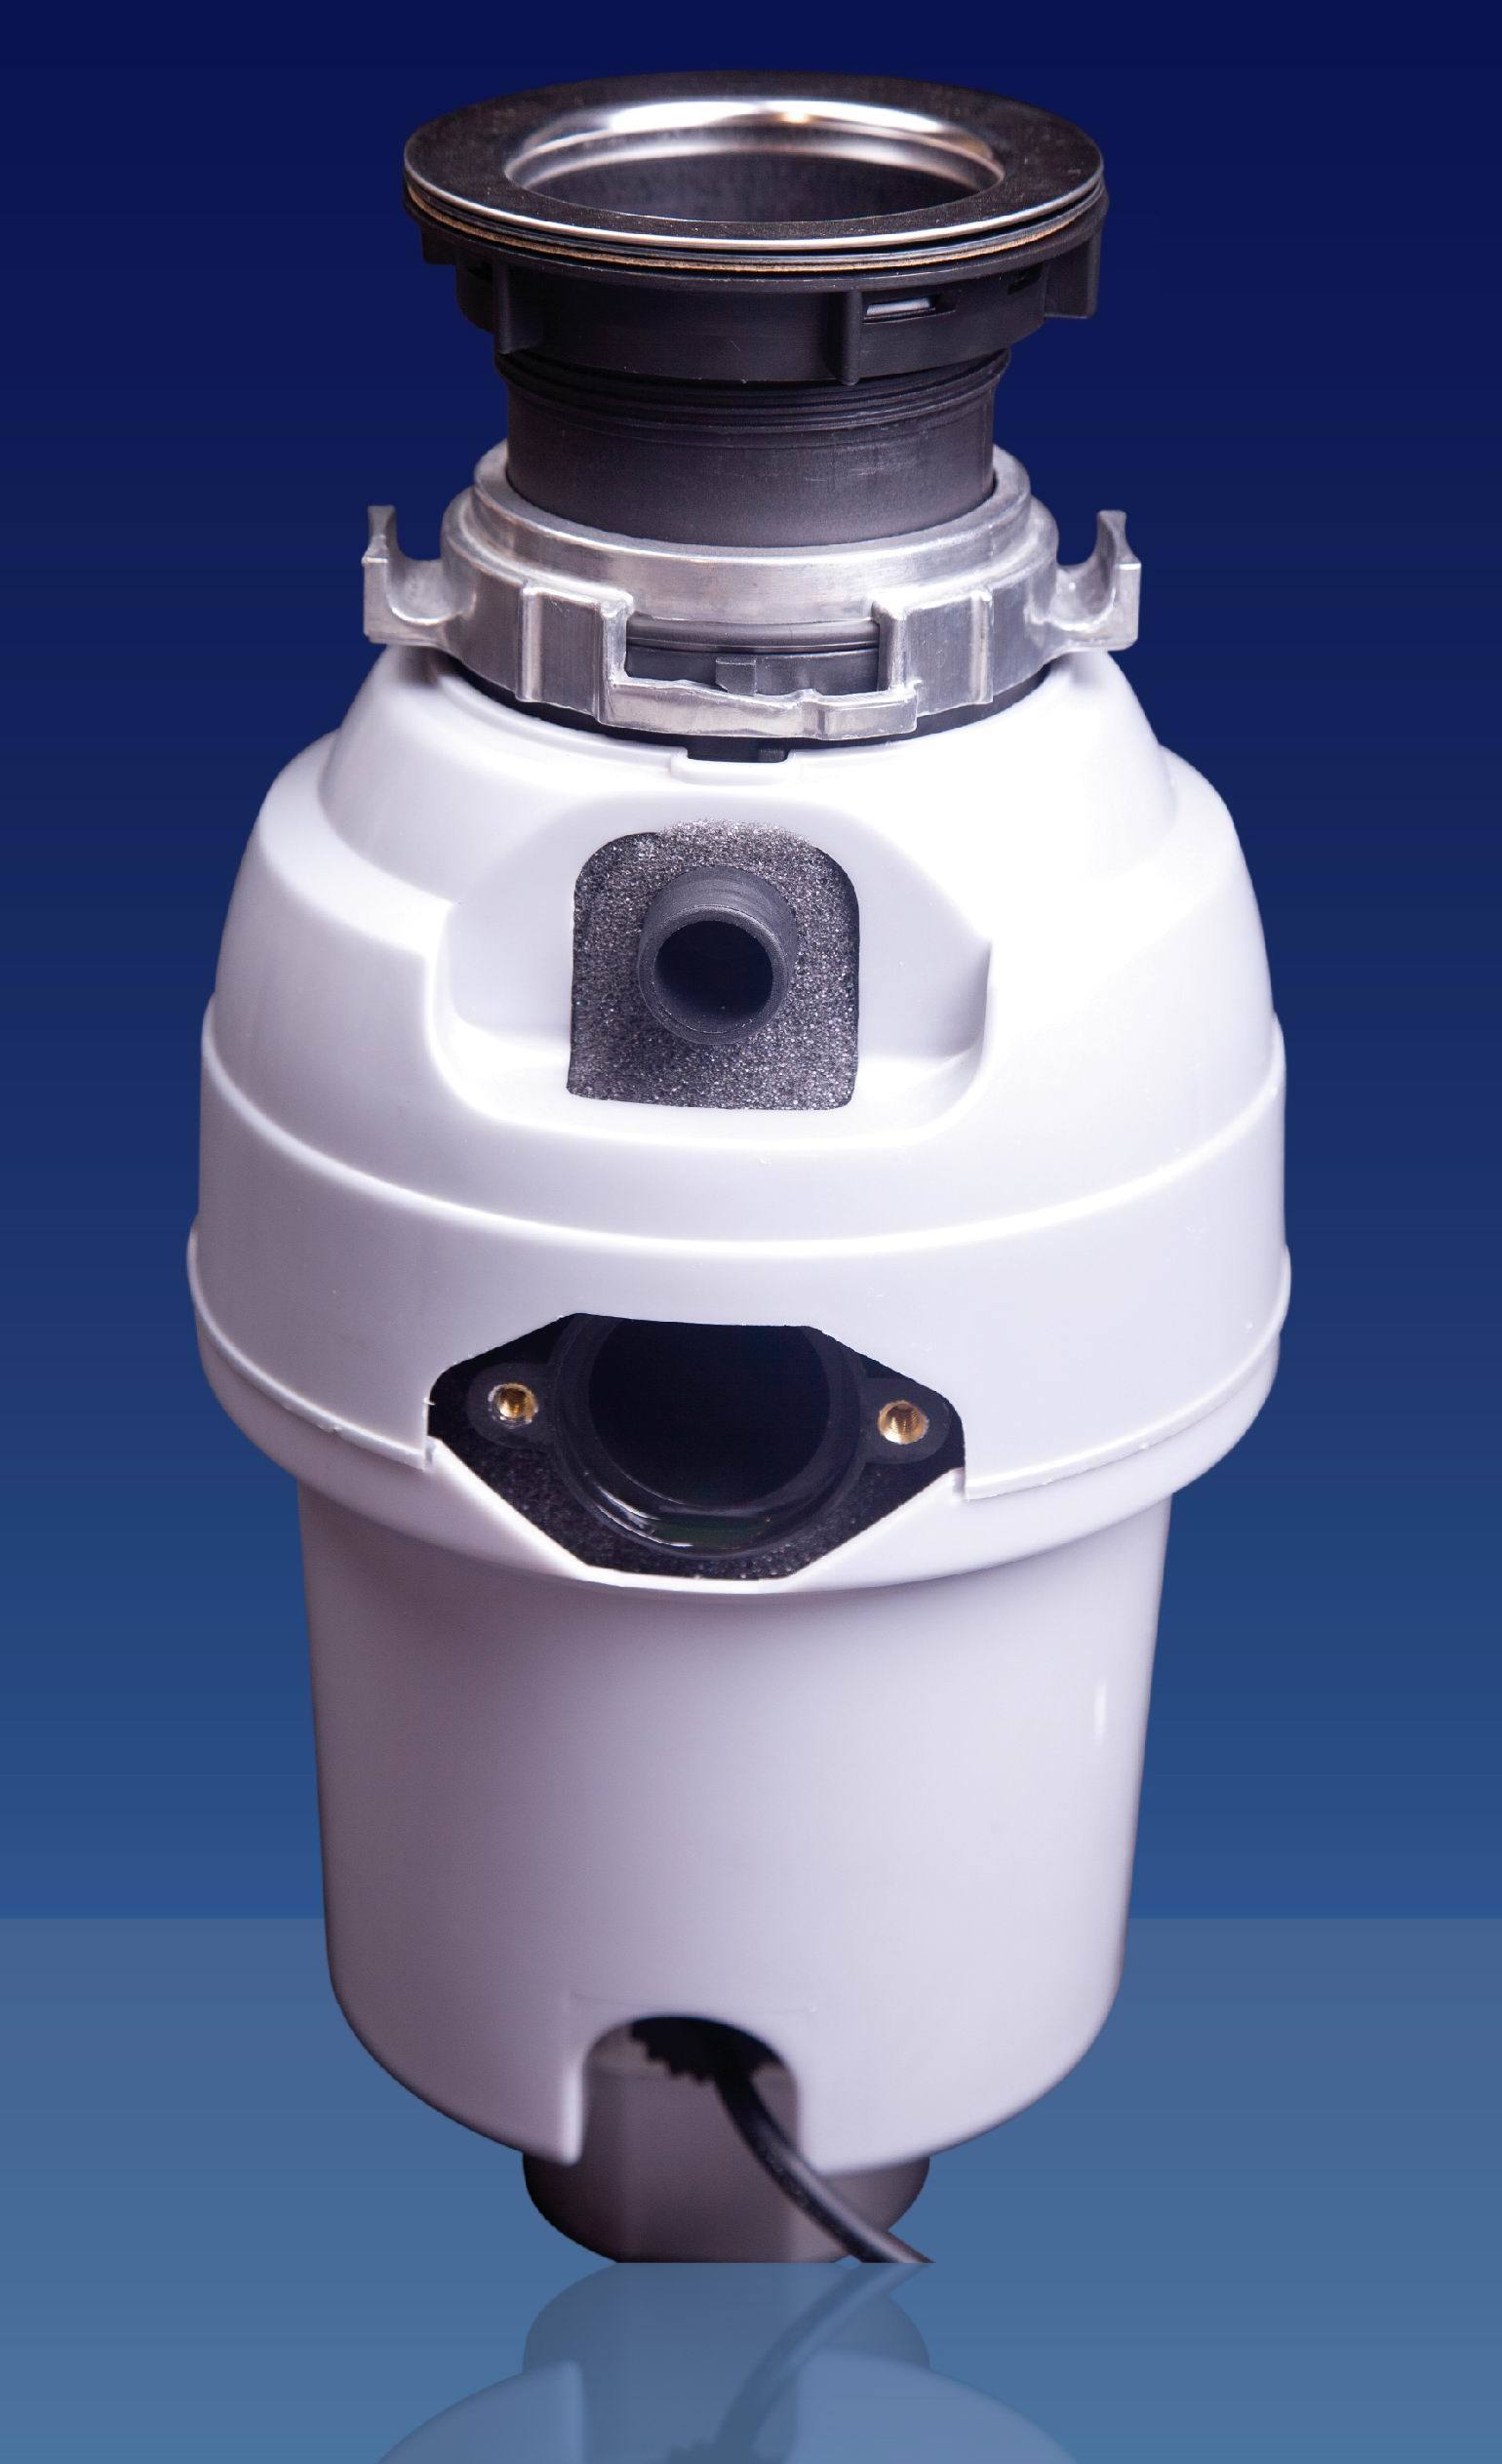 High Quality Kitchenware Food Waste Disposer (Jft-468A)